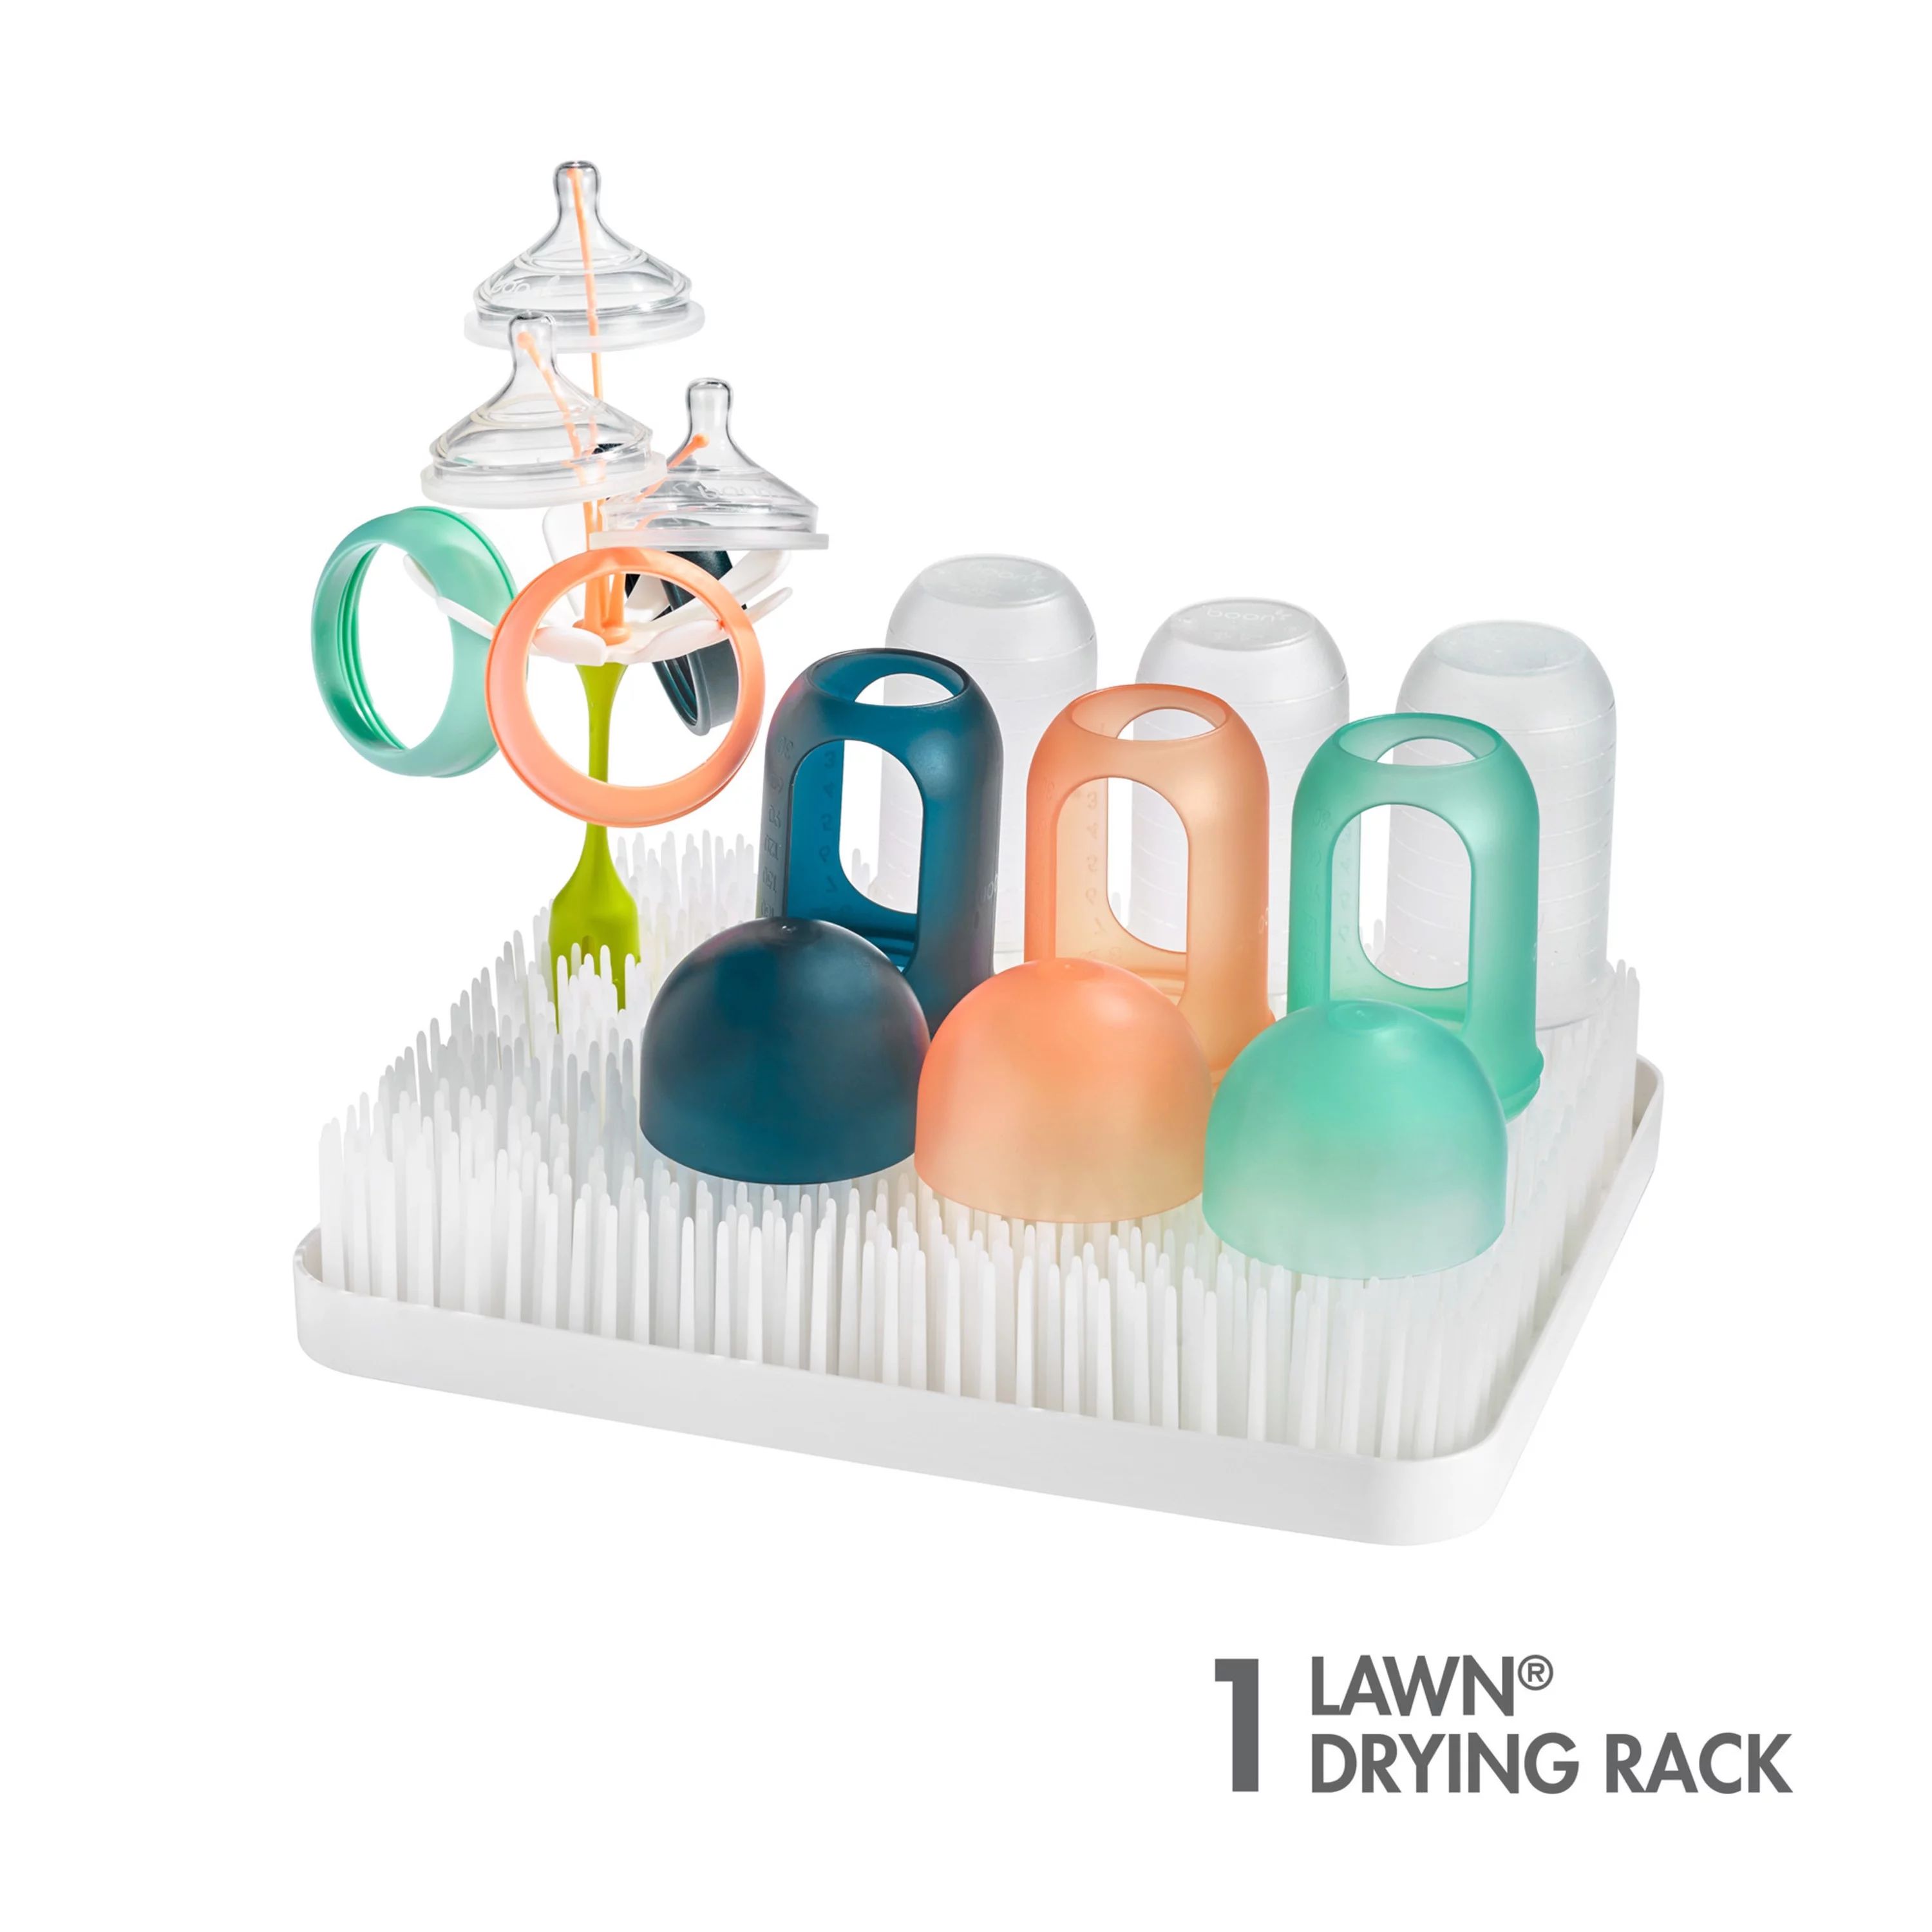 Boon Lawn Countertop Drying Rack, Low-Profile Easy To Clean Baby Bottle Drying Rack, White | Walmart (US)